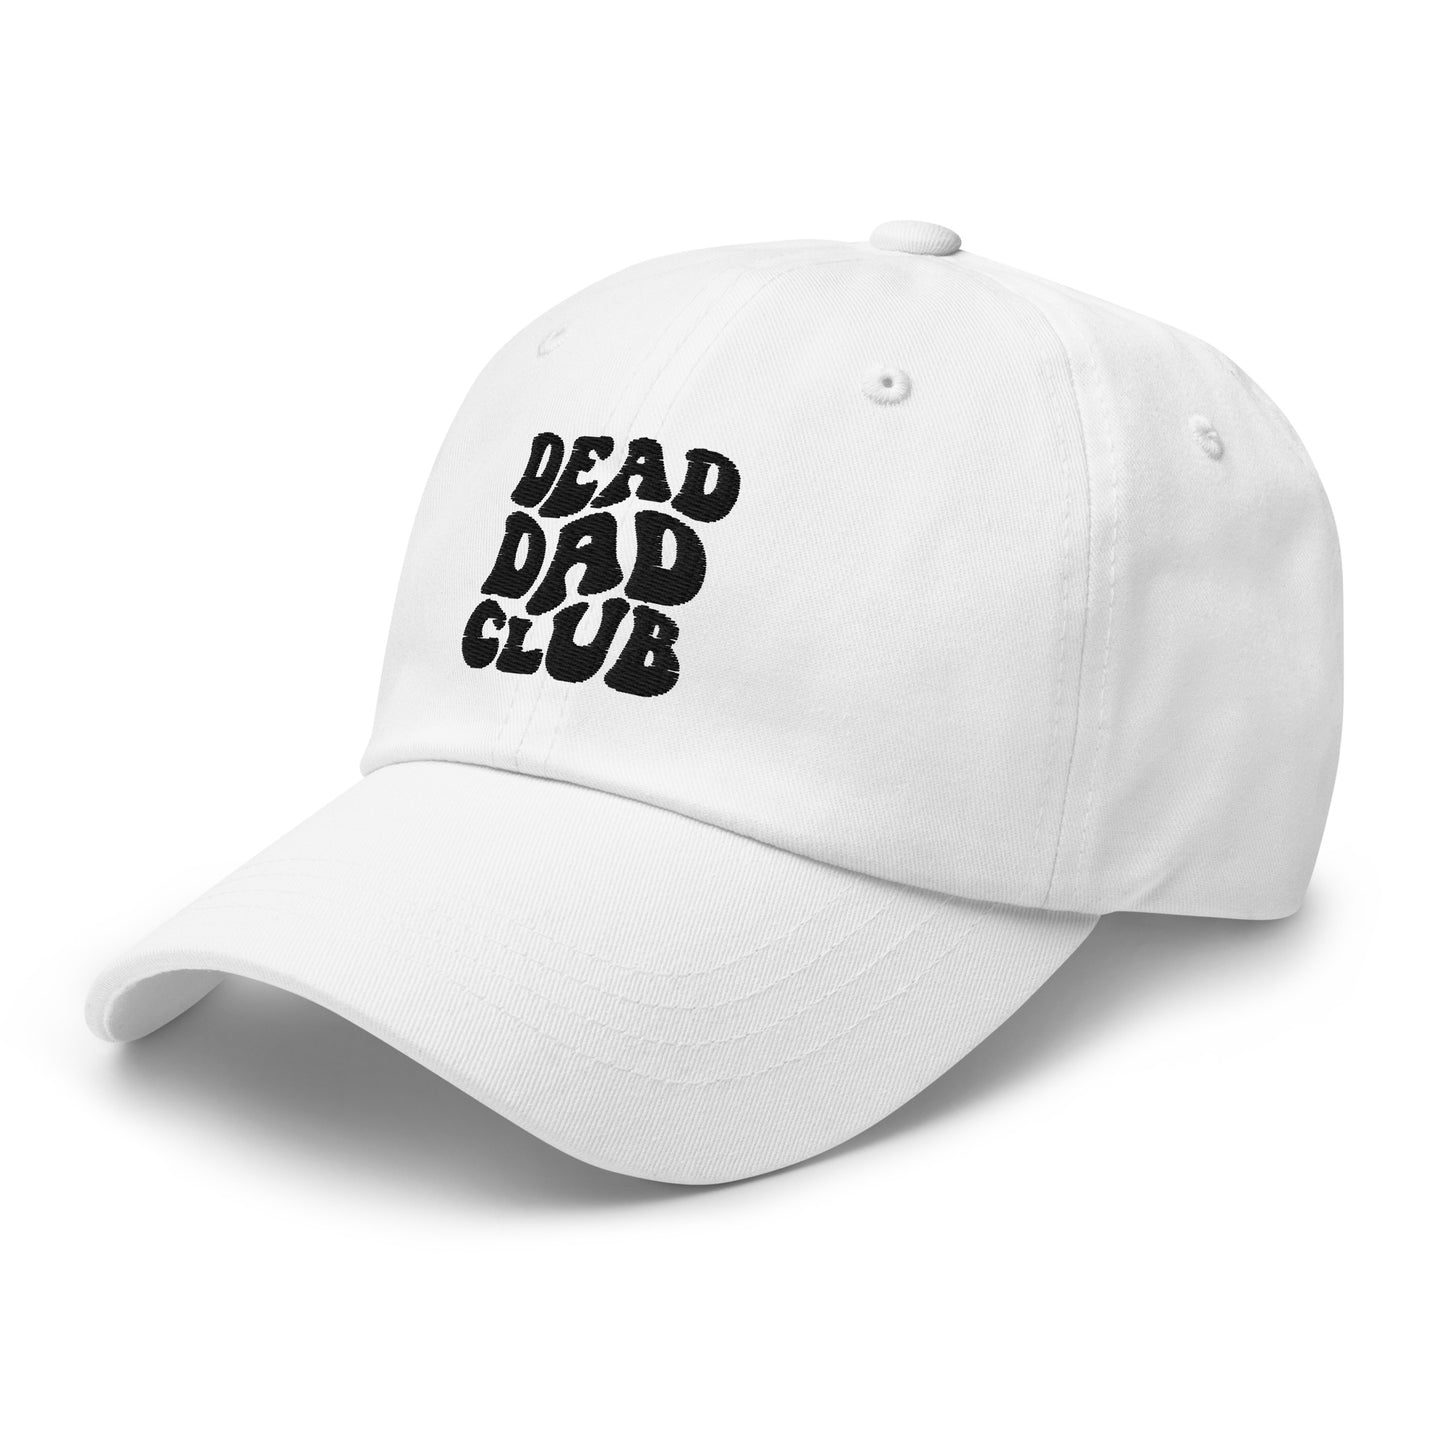 The (Dead) Dad Hat